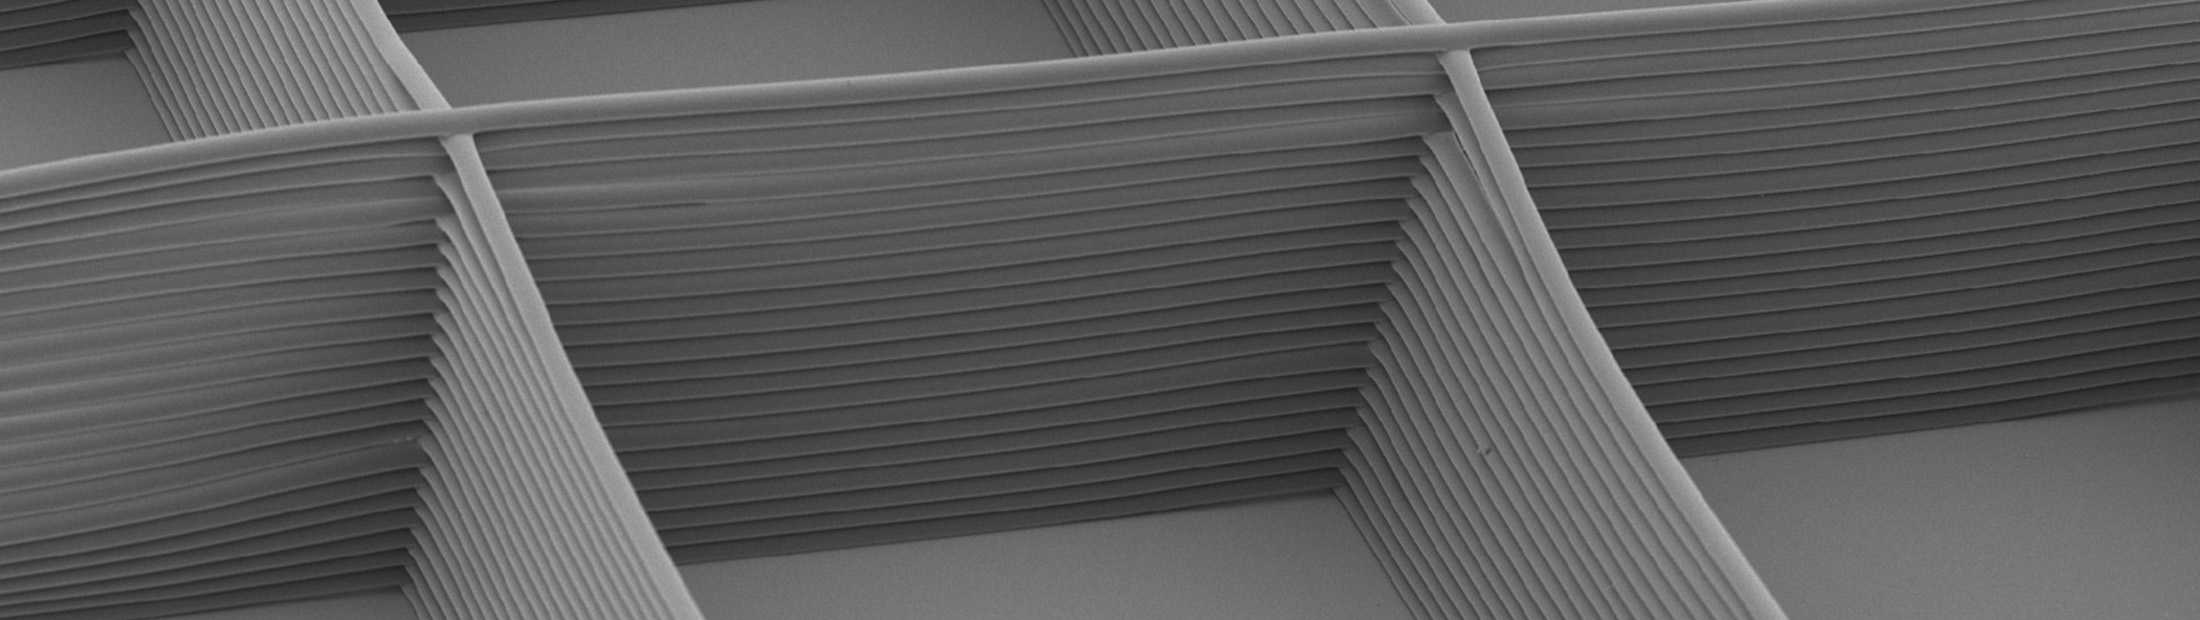 Microscopic 3d printed grey grid used for growing cells